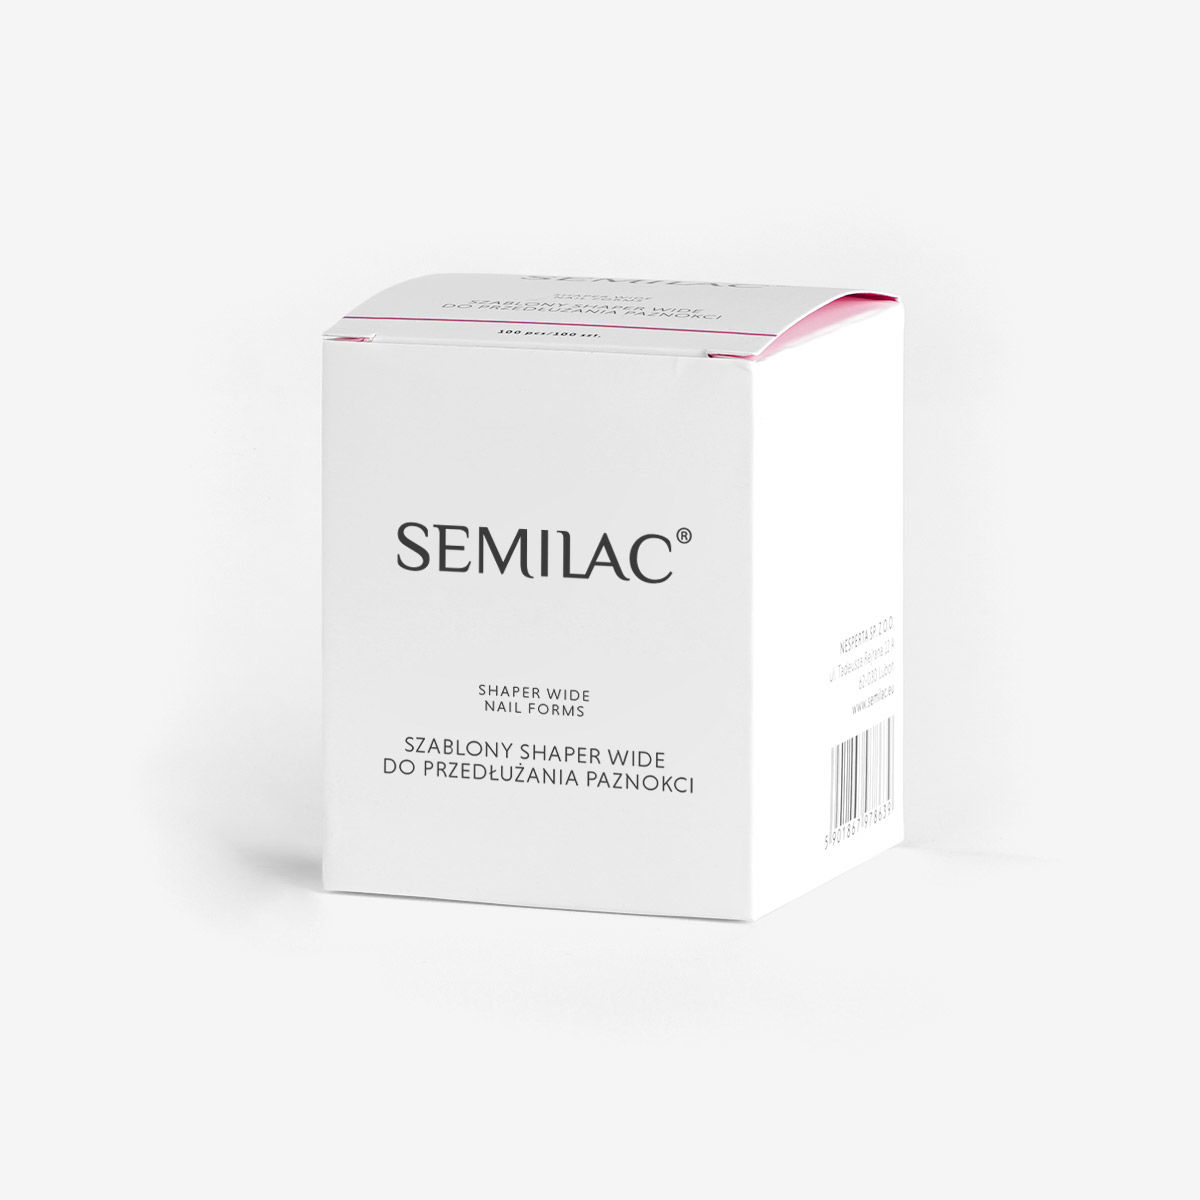 Semilac Shaper Wide Nail Forms - 100 szt.